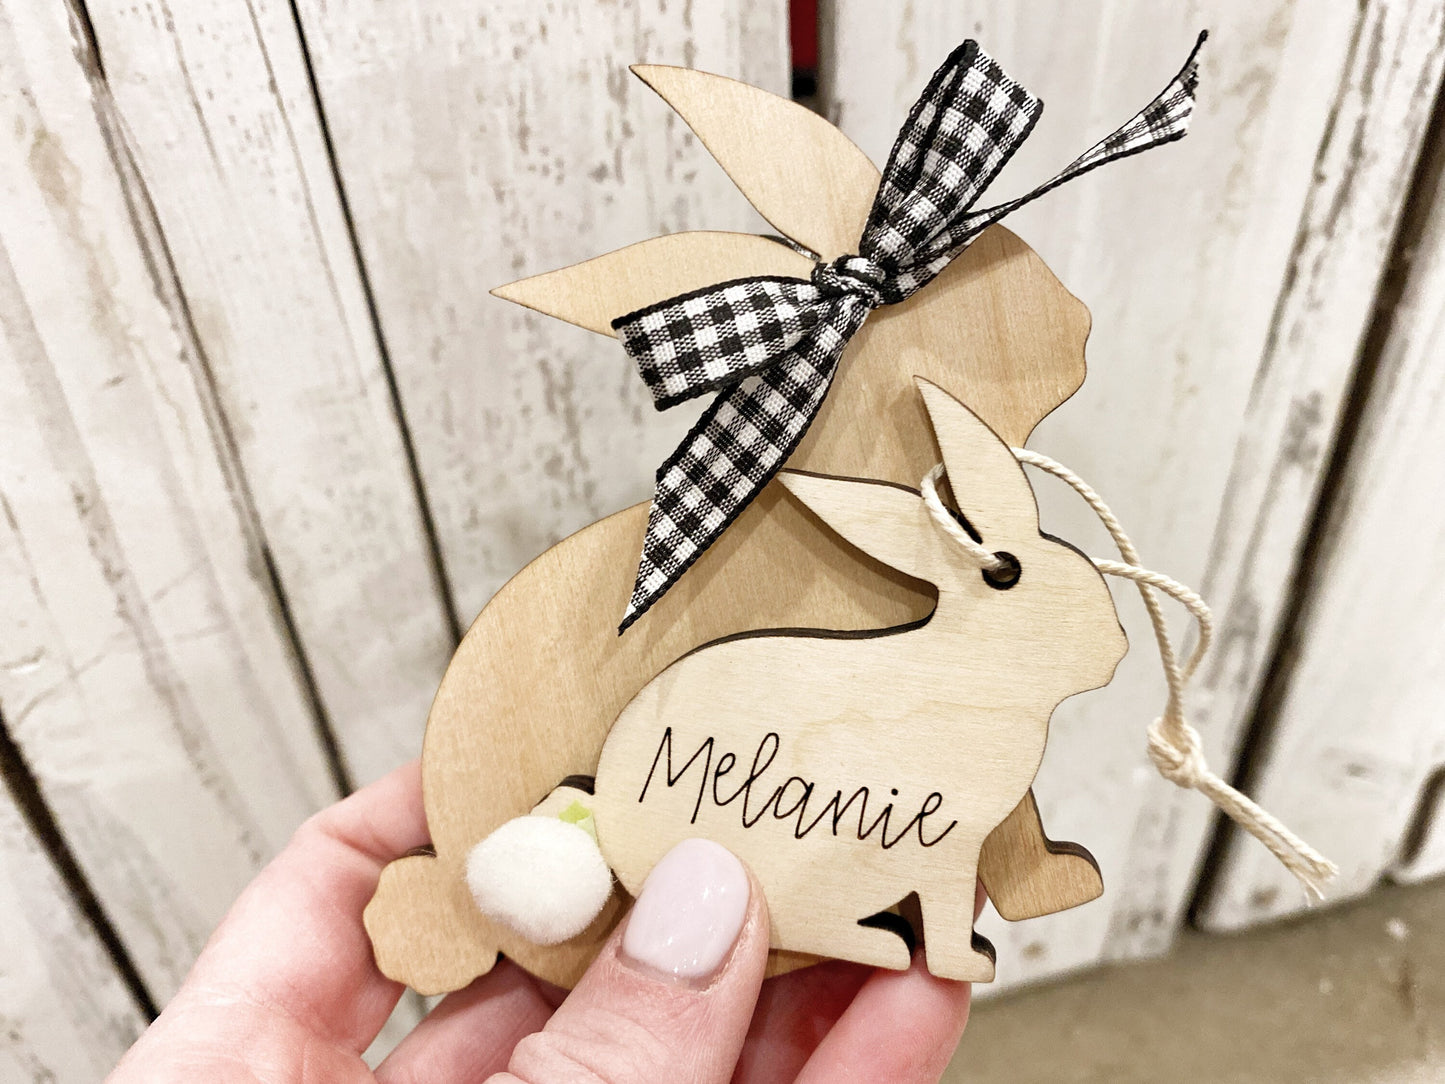 Easter Basket Tag, Personalized Name Bunny Fuzzy Tail, Engraved Easter Decor, Tiered Tray, Custom Wood Place Tag, Buffalo Plaid Spring Decor